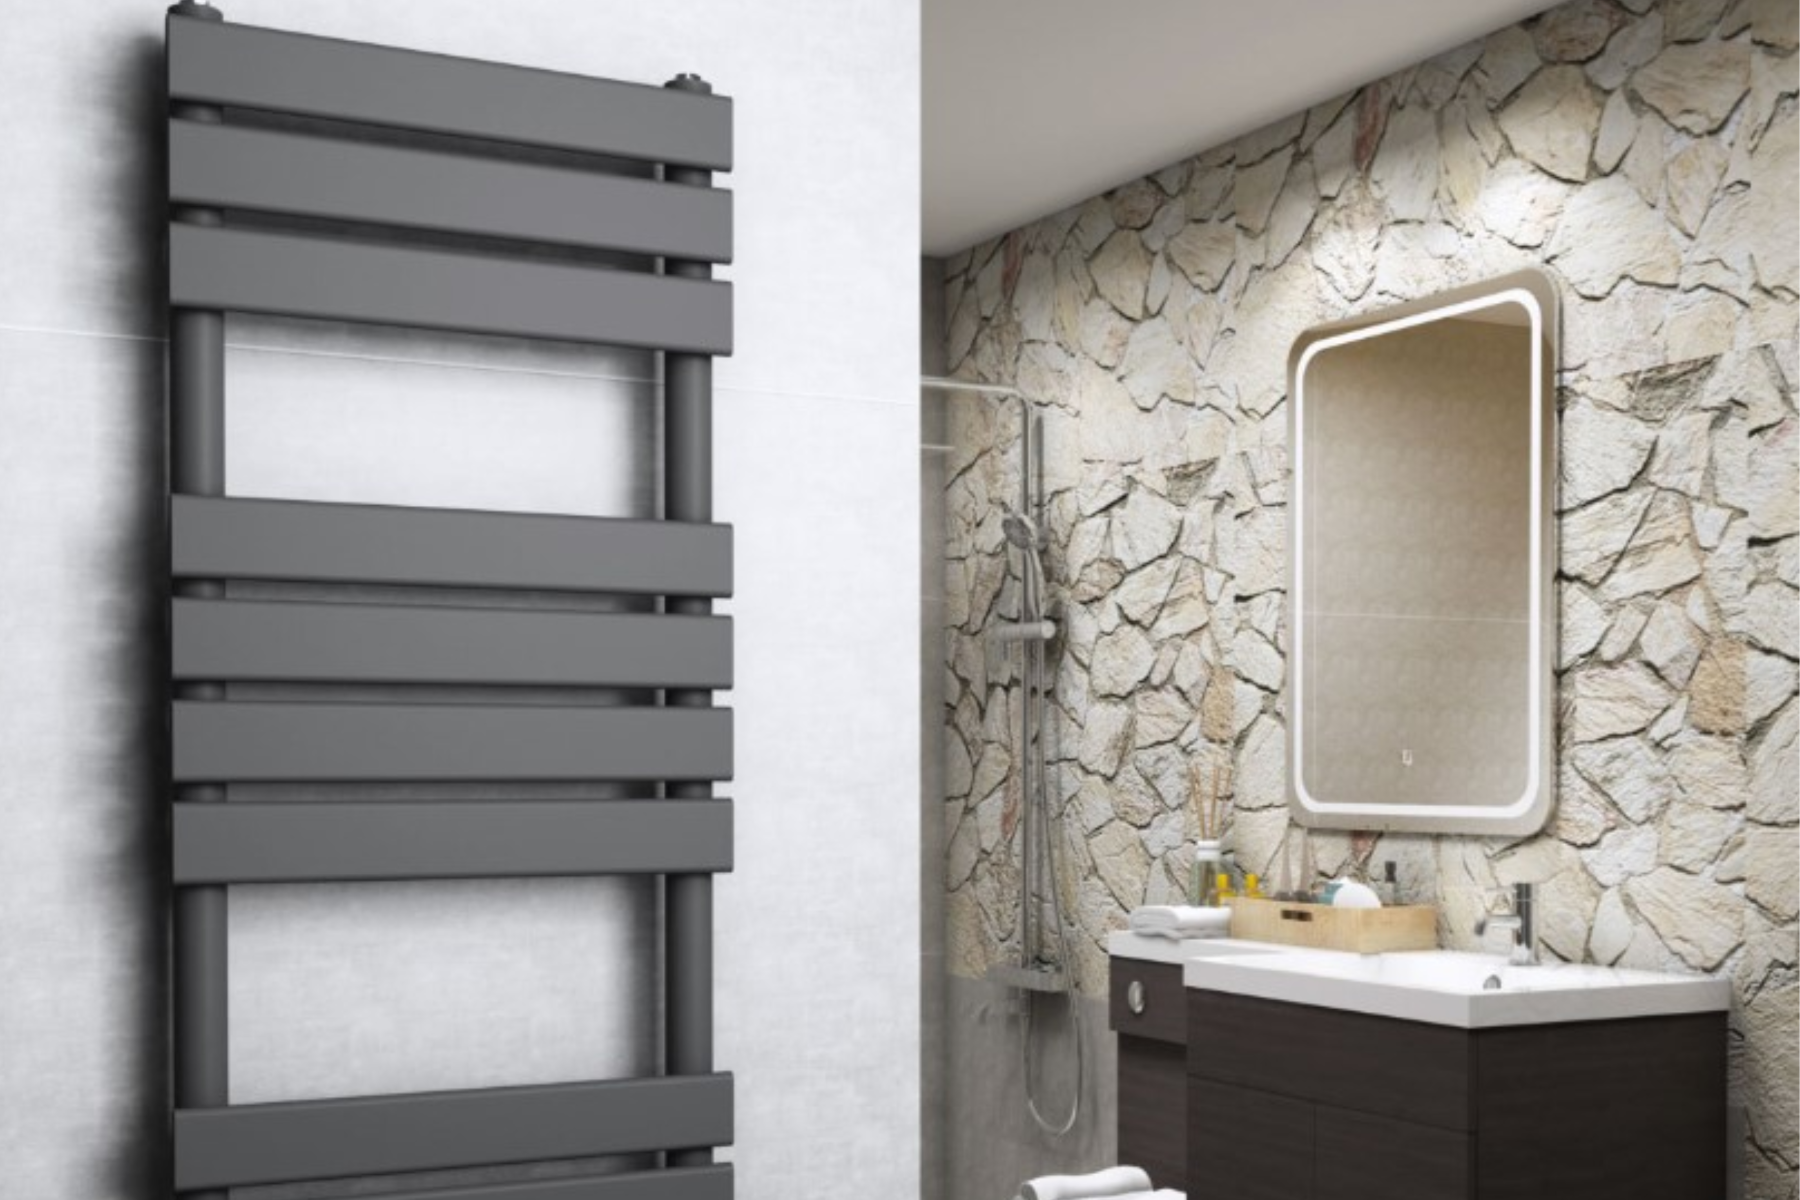 Vertical Radiator In Bathroom With A Stylish Bathroom Wallpaper Feature